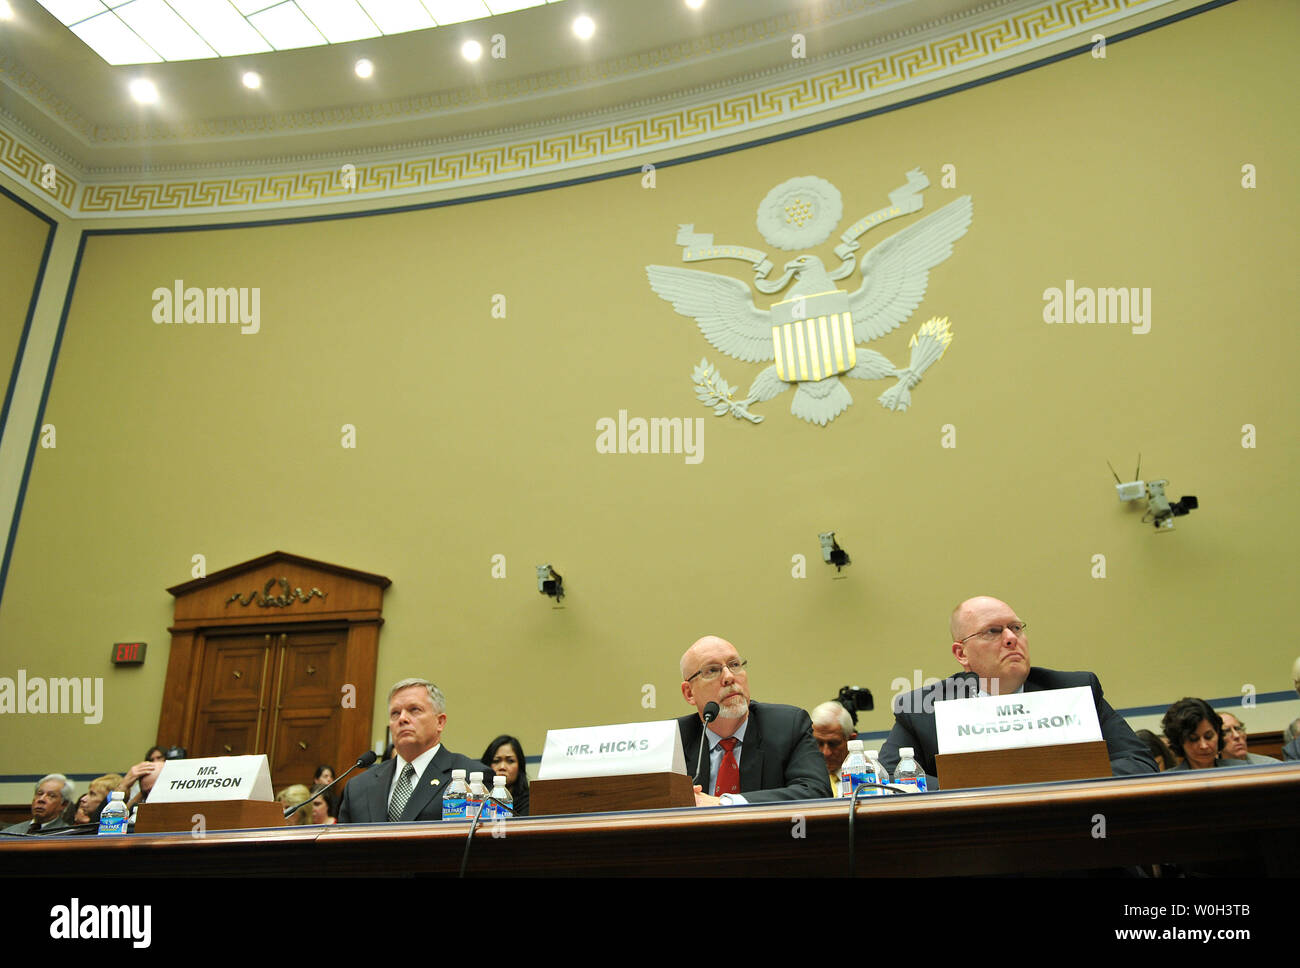 From left to right, Mark Thompson, Acting Deputy Assistant Secretary for Counterterrorism at the Department of State, Gregory Hicks, Foreign Service Officer and former Deputy Chief of Mission in Libya, and Eric Nordstrom, Diplomatic Security Officer and former Regional Security Officer in Libya, testify during a House Oversight and Governmental Reform Committee hearing on the terrorist attacks on the diplomatic compound in Benghazi, on Capitol Hill on May 8, 2013 in Washington, D.C. UPI/Kevin Dietsch Stock Photo